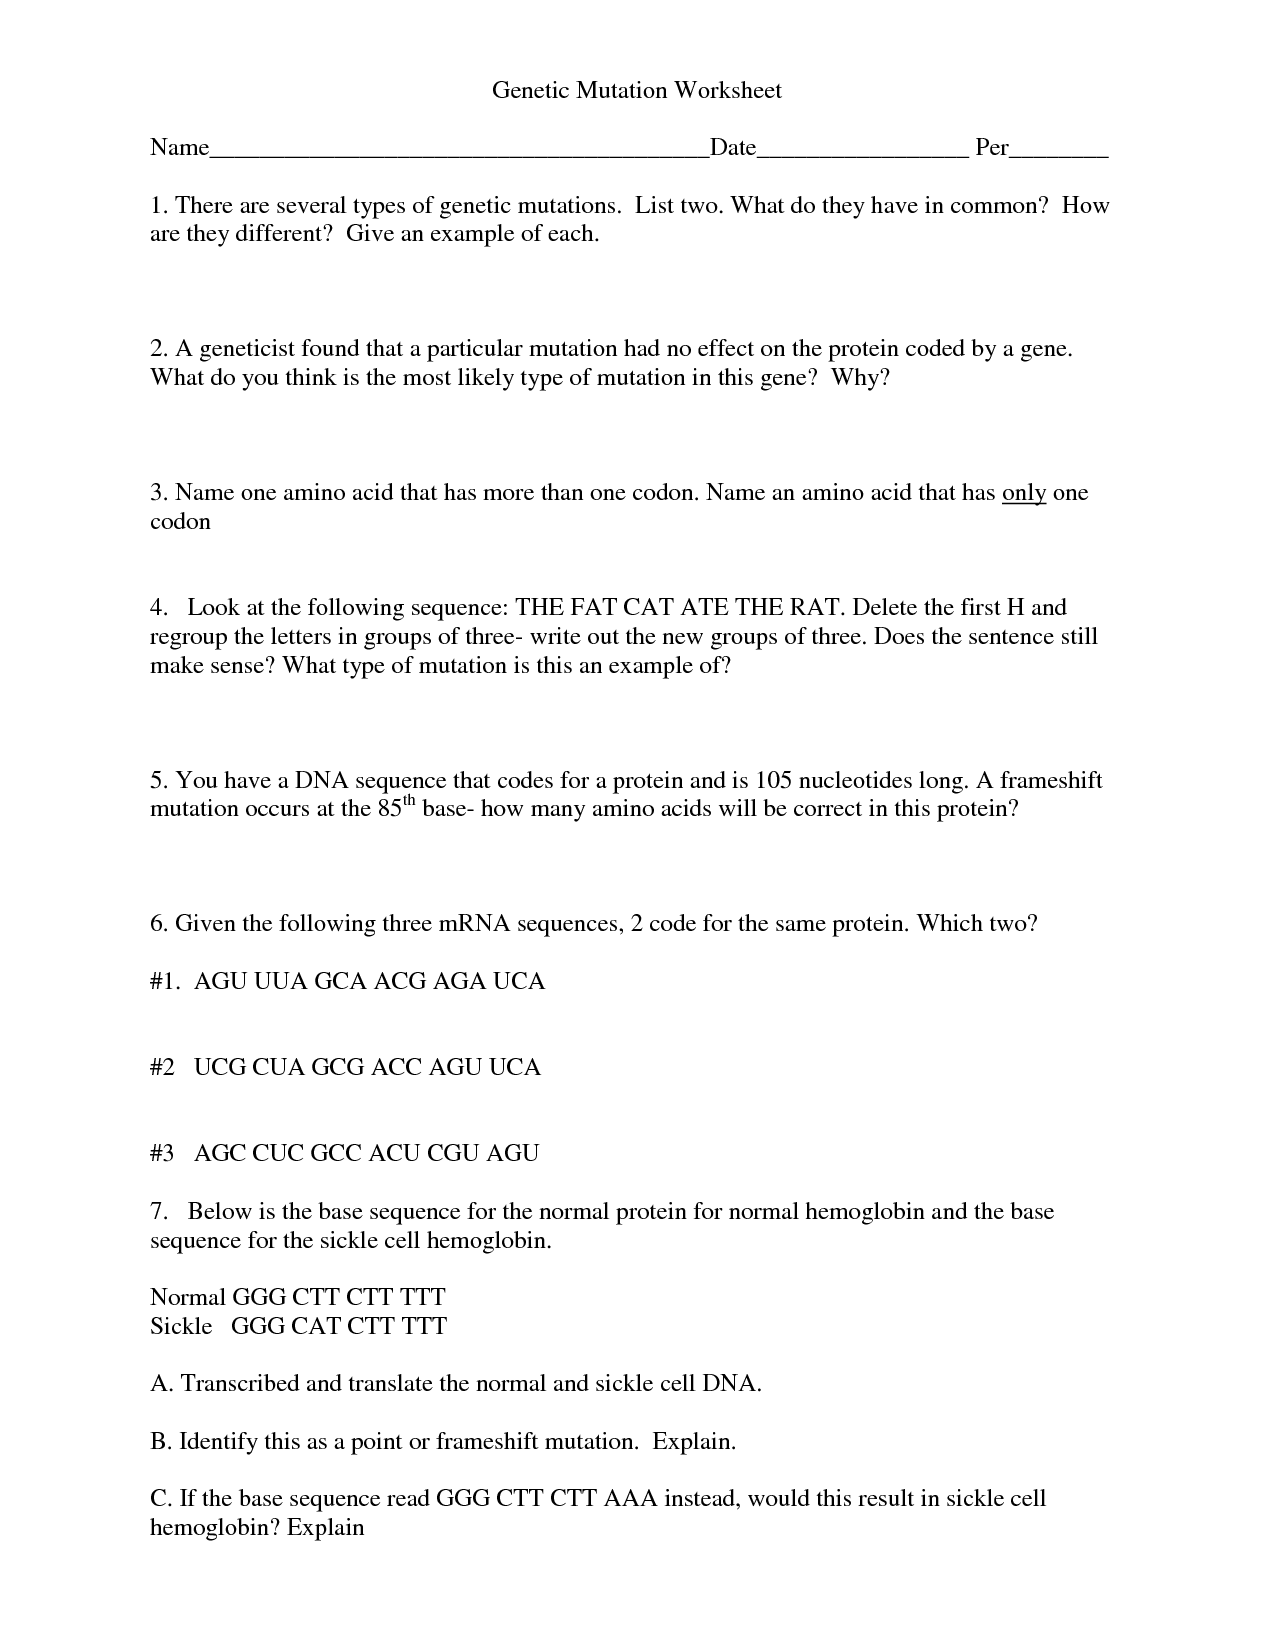 13-best-images-of-chromosomes-and-genes-worksheet-dna-and-replication-worksheet-answers-gene